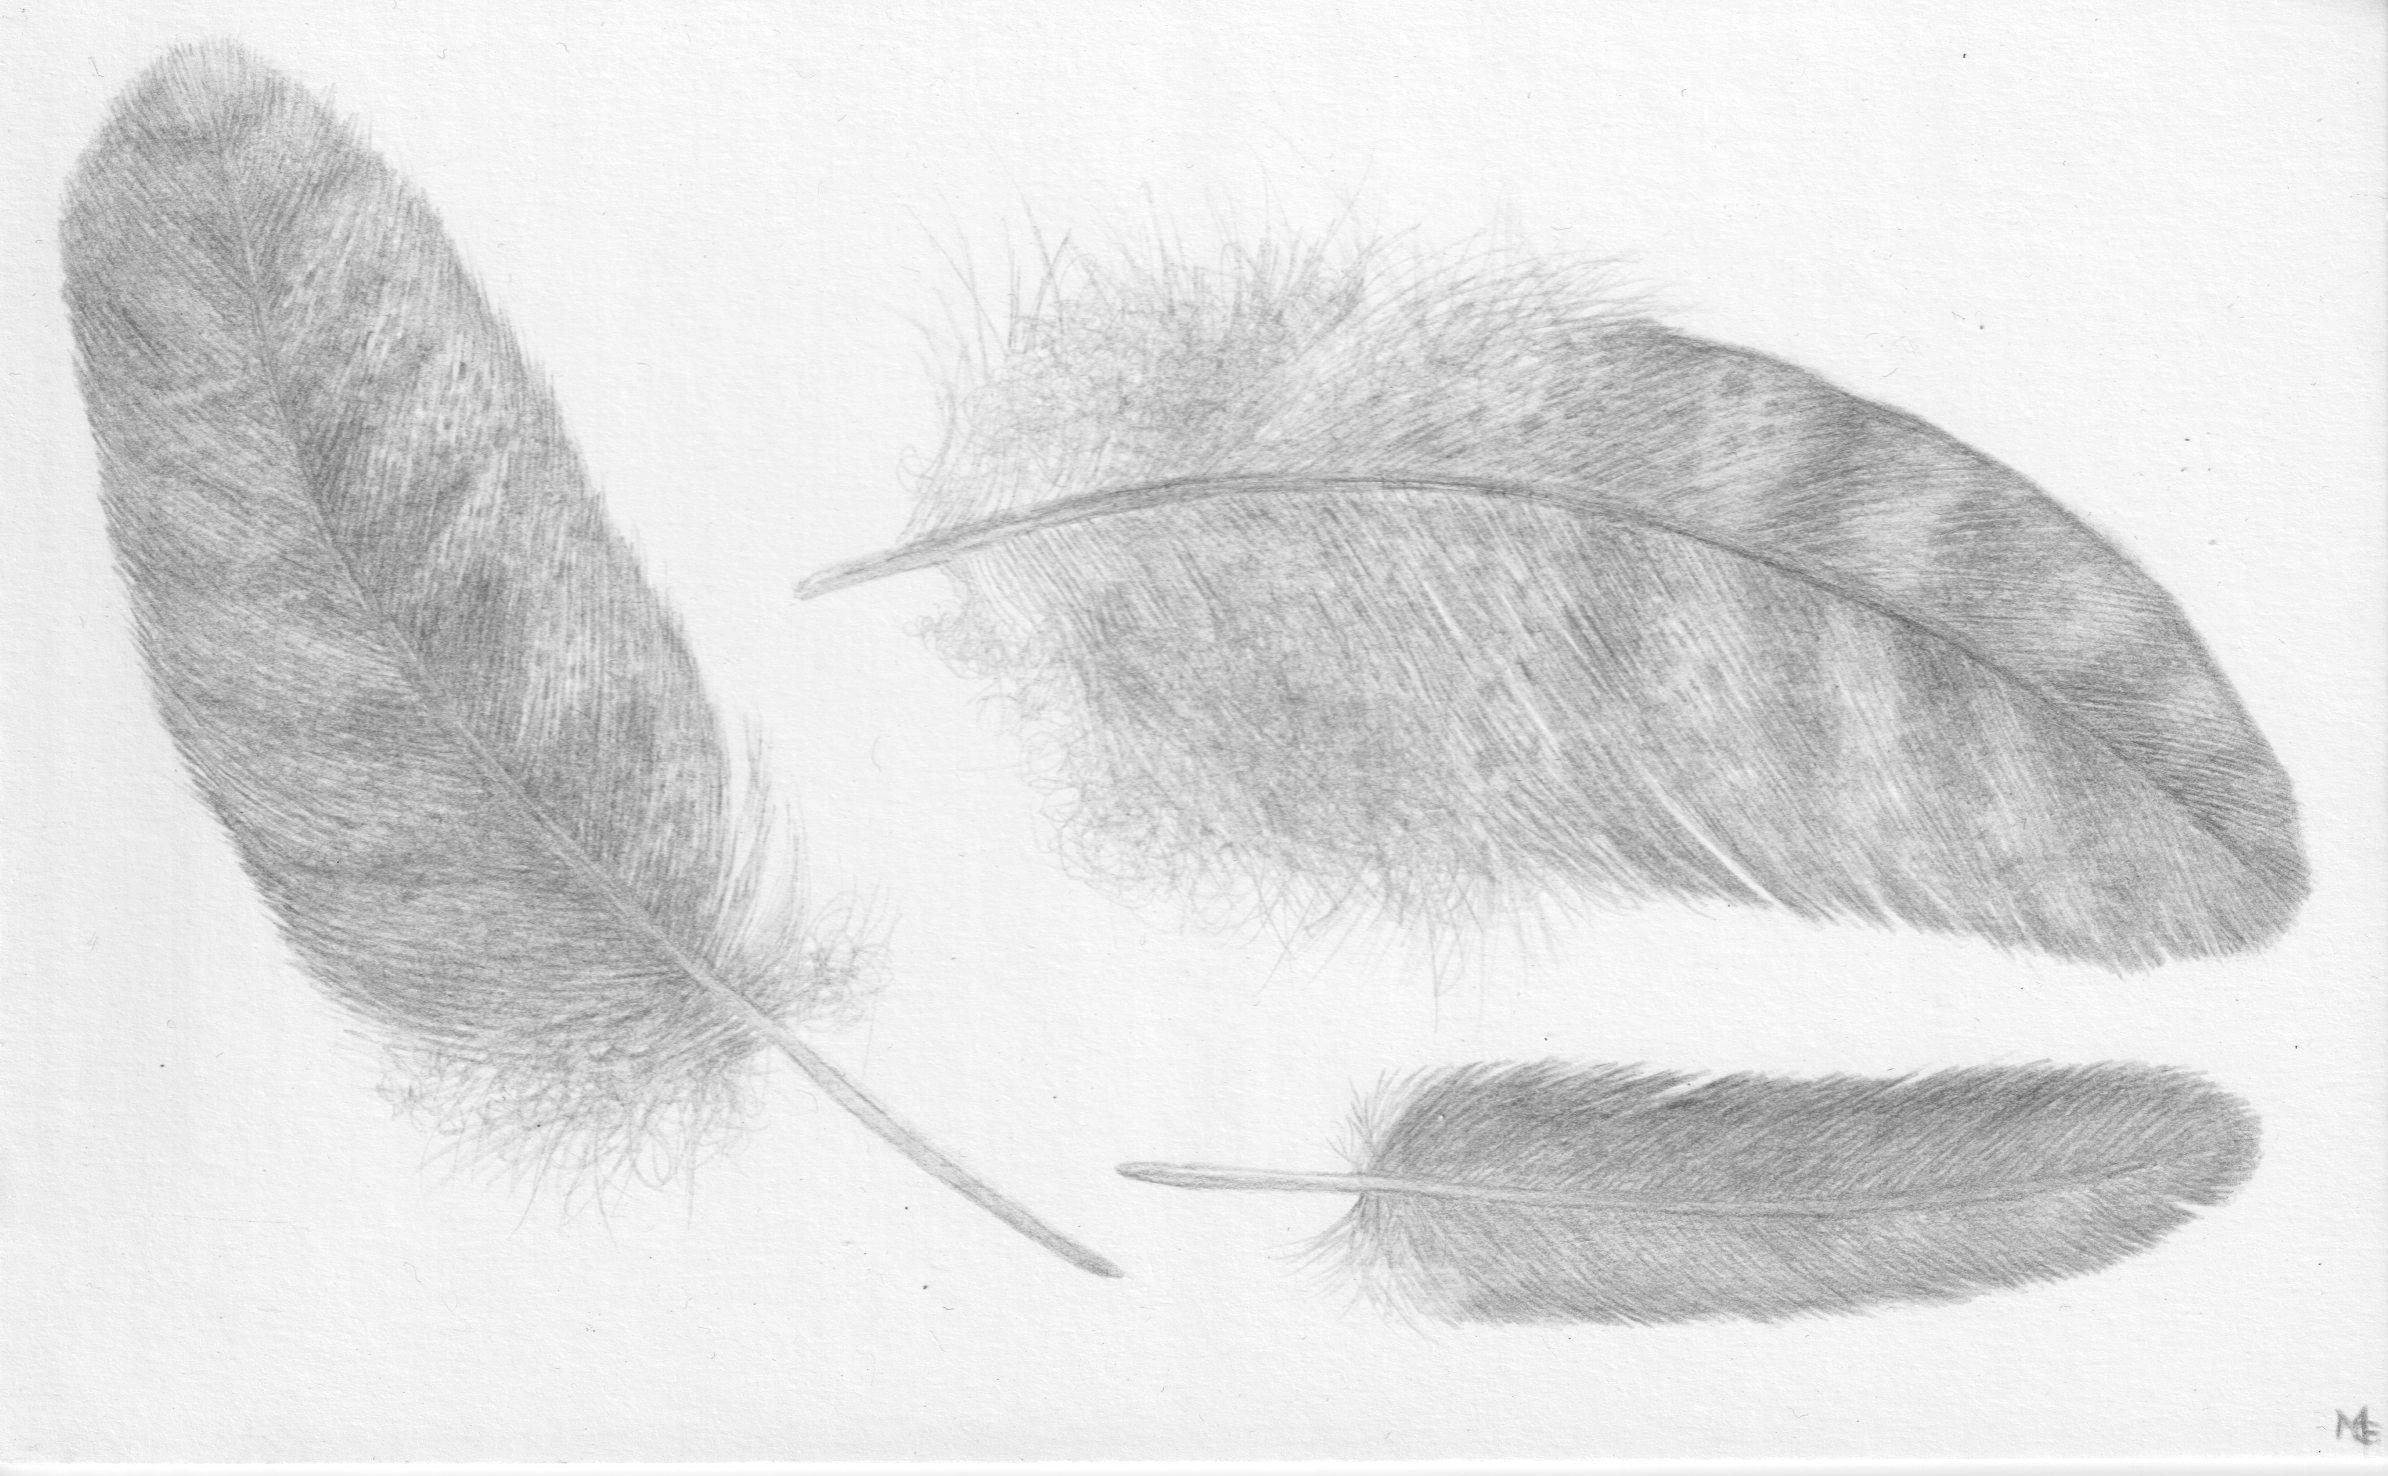 Three Feathers, Silverpoint Drawing, Bird's Feathers, Soft Gray, White